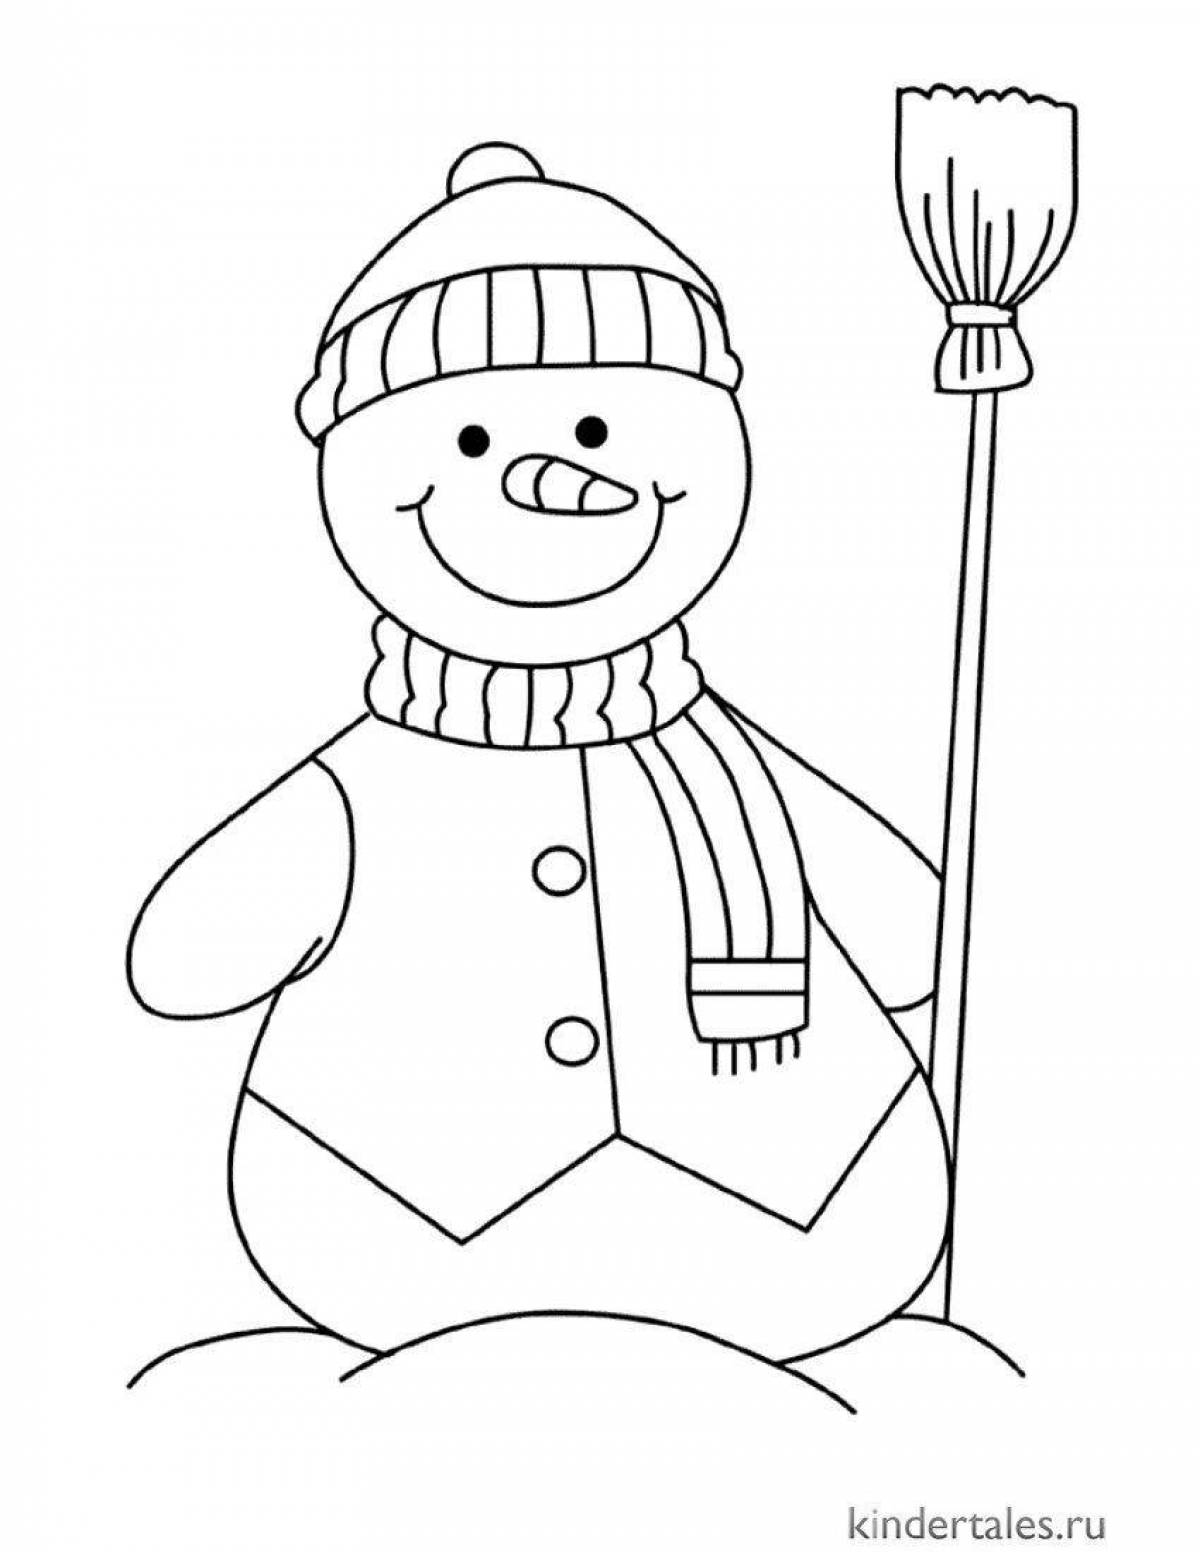 A fun snowman coloring book for kids 2 3